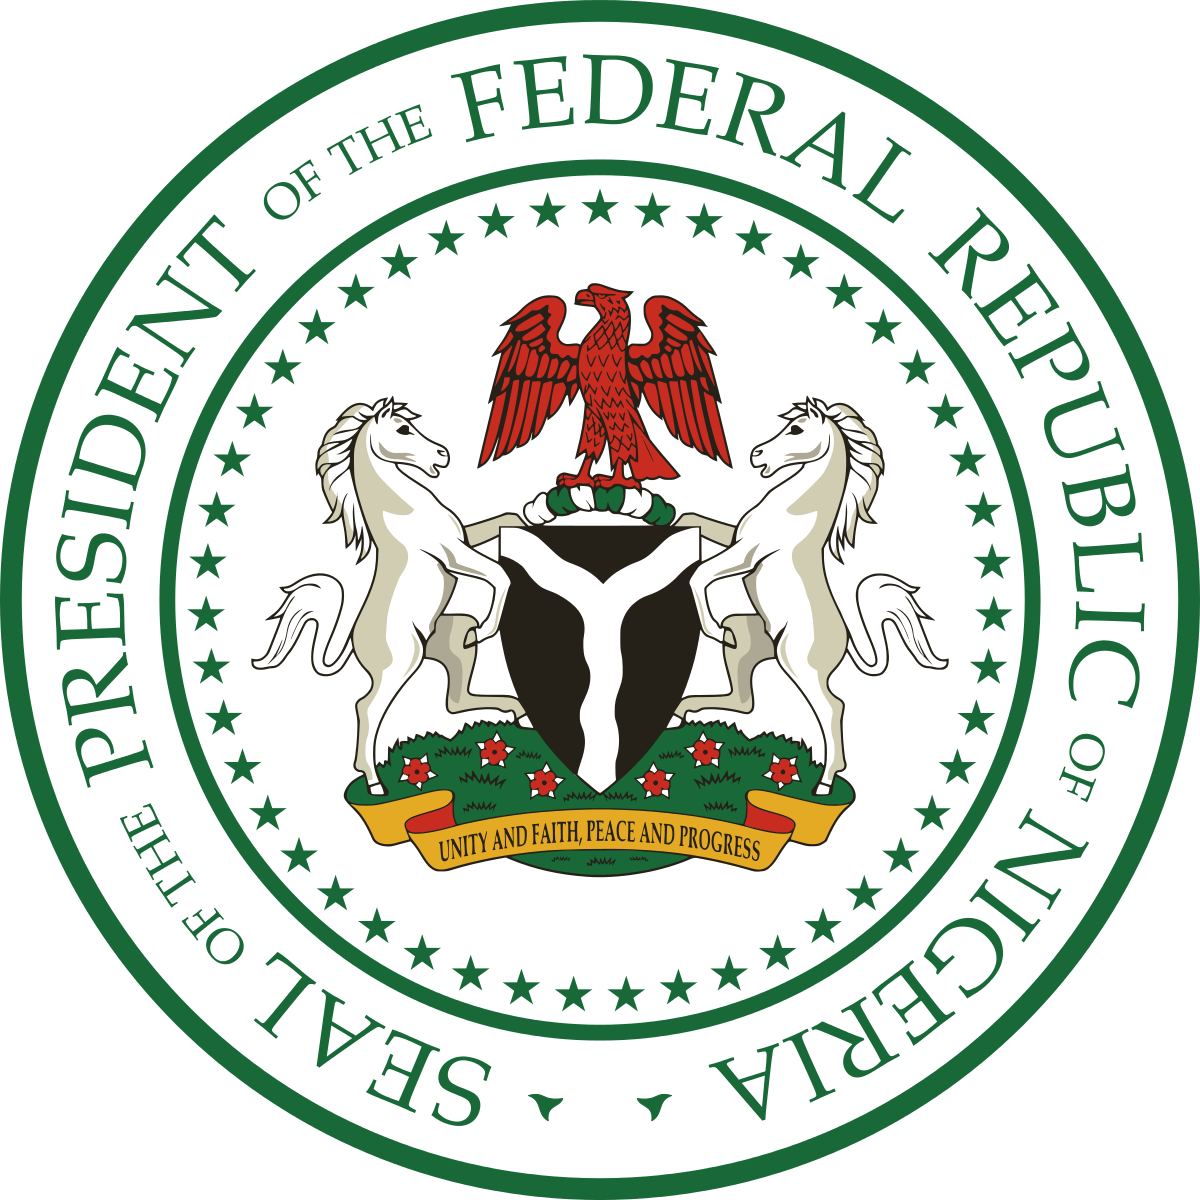 Presidency Appeals to Prominent Nigerians to Use Their Influence Wisely